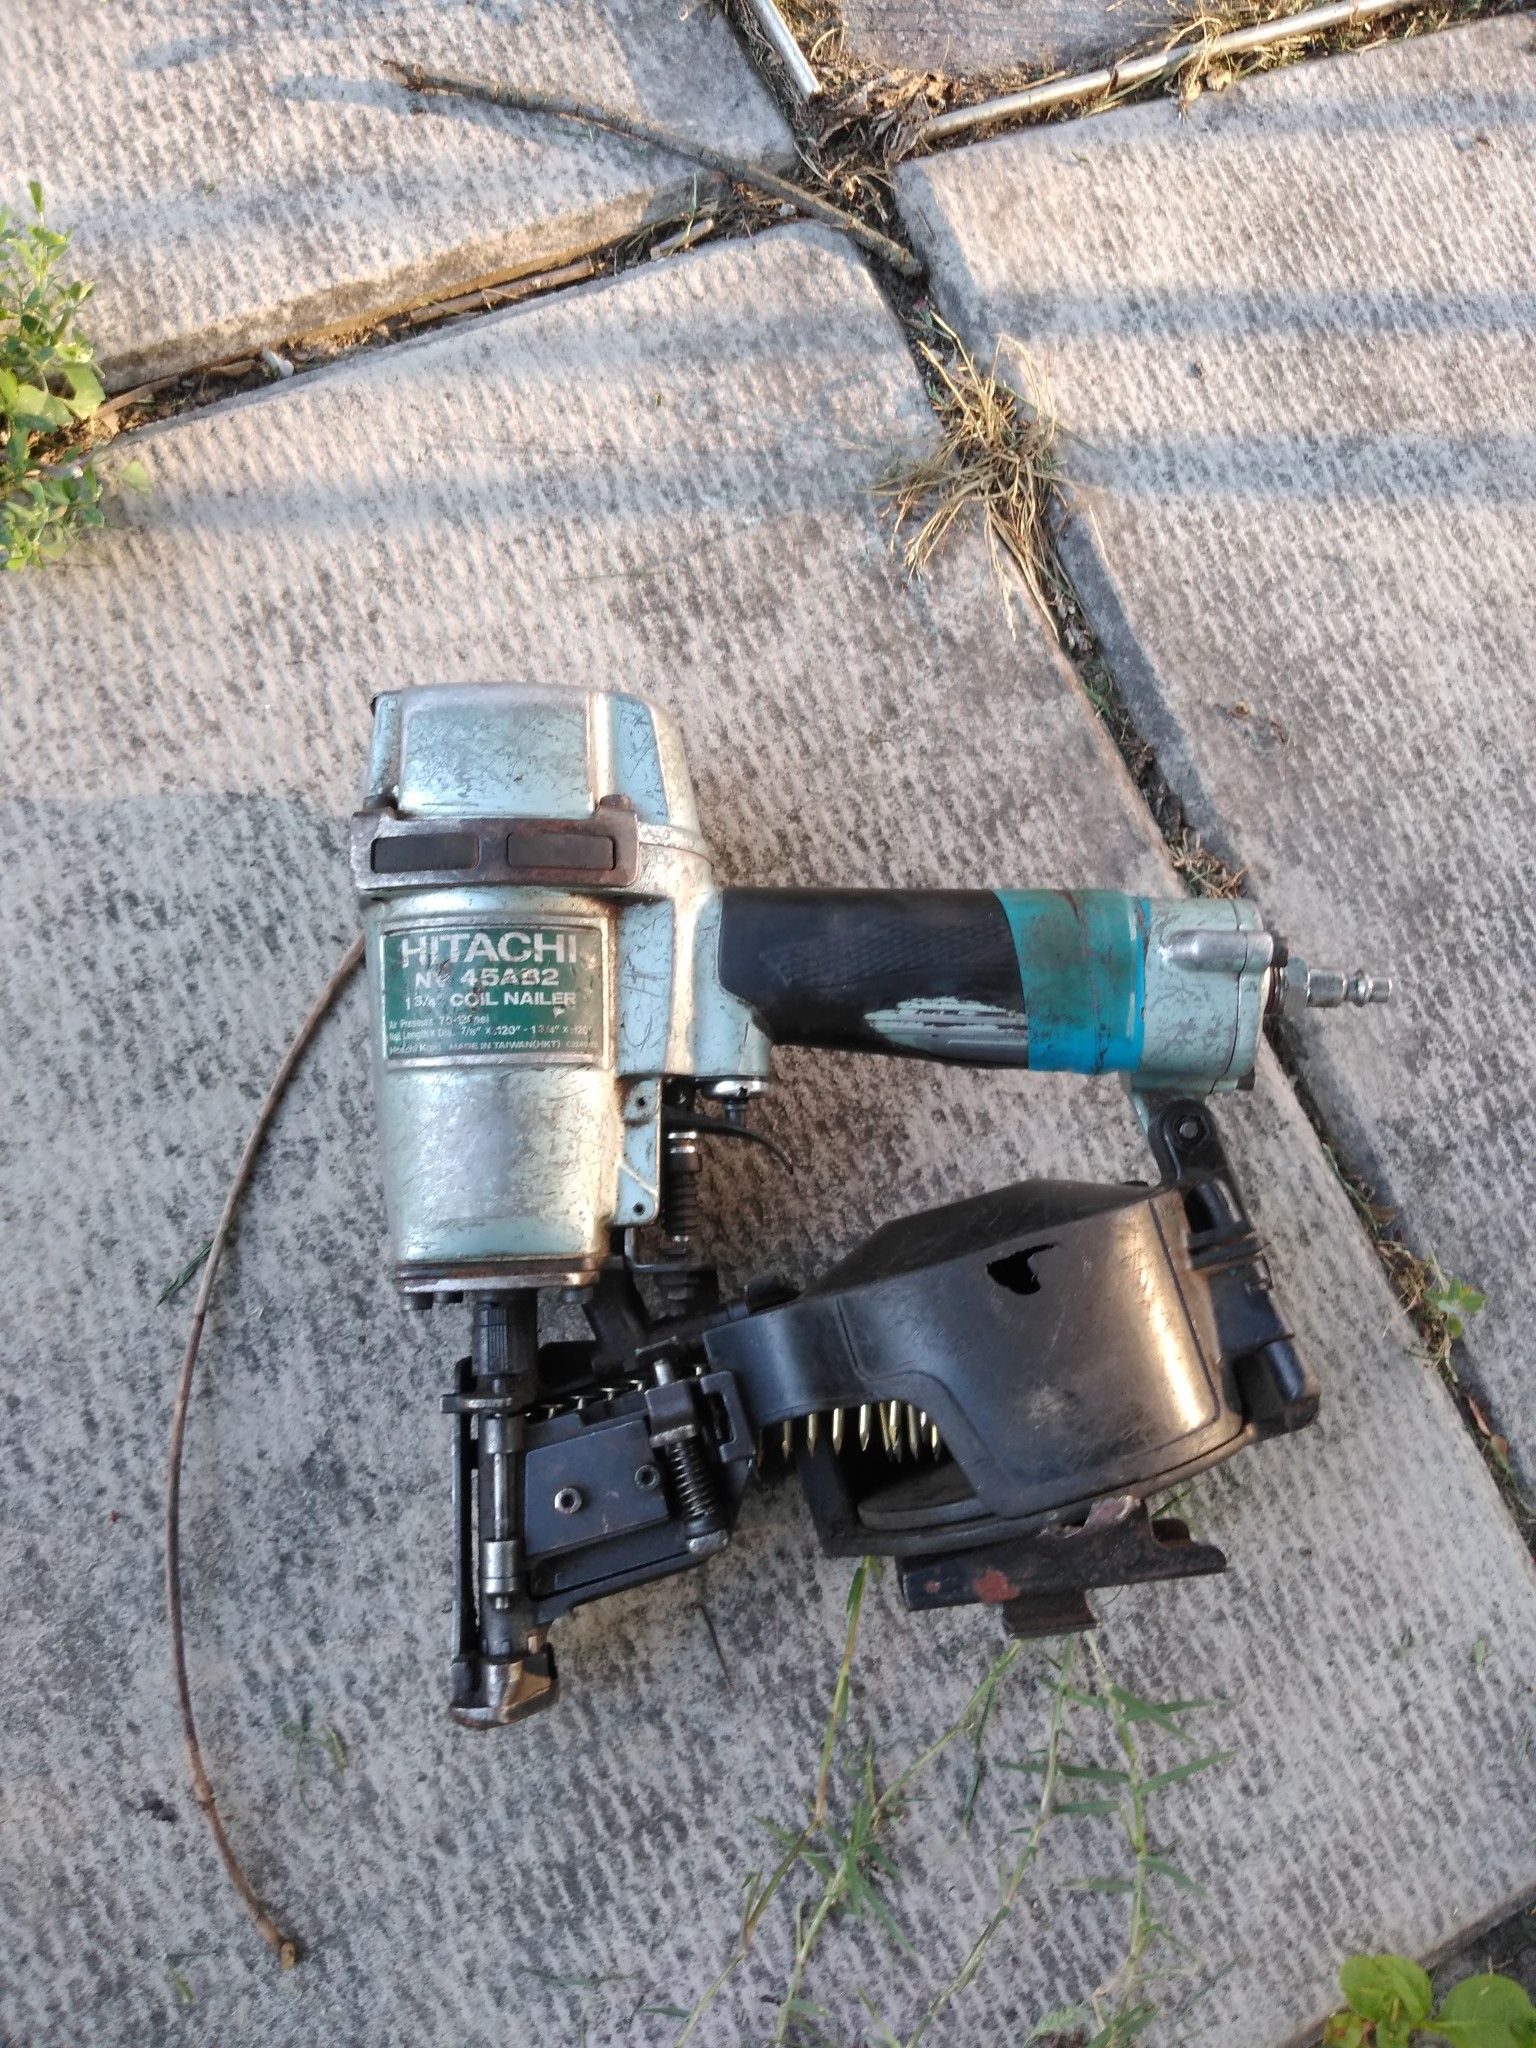 Used roofing nailer in very good condition